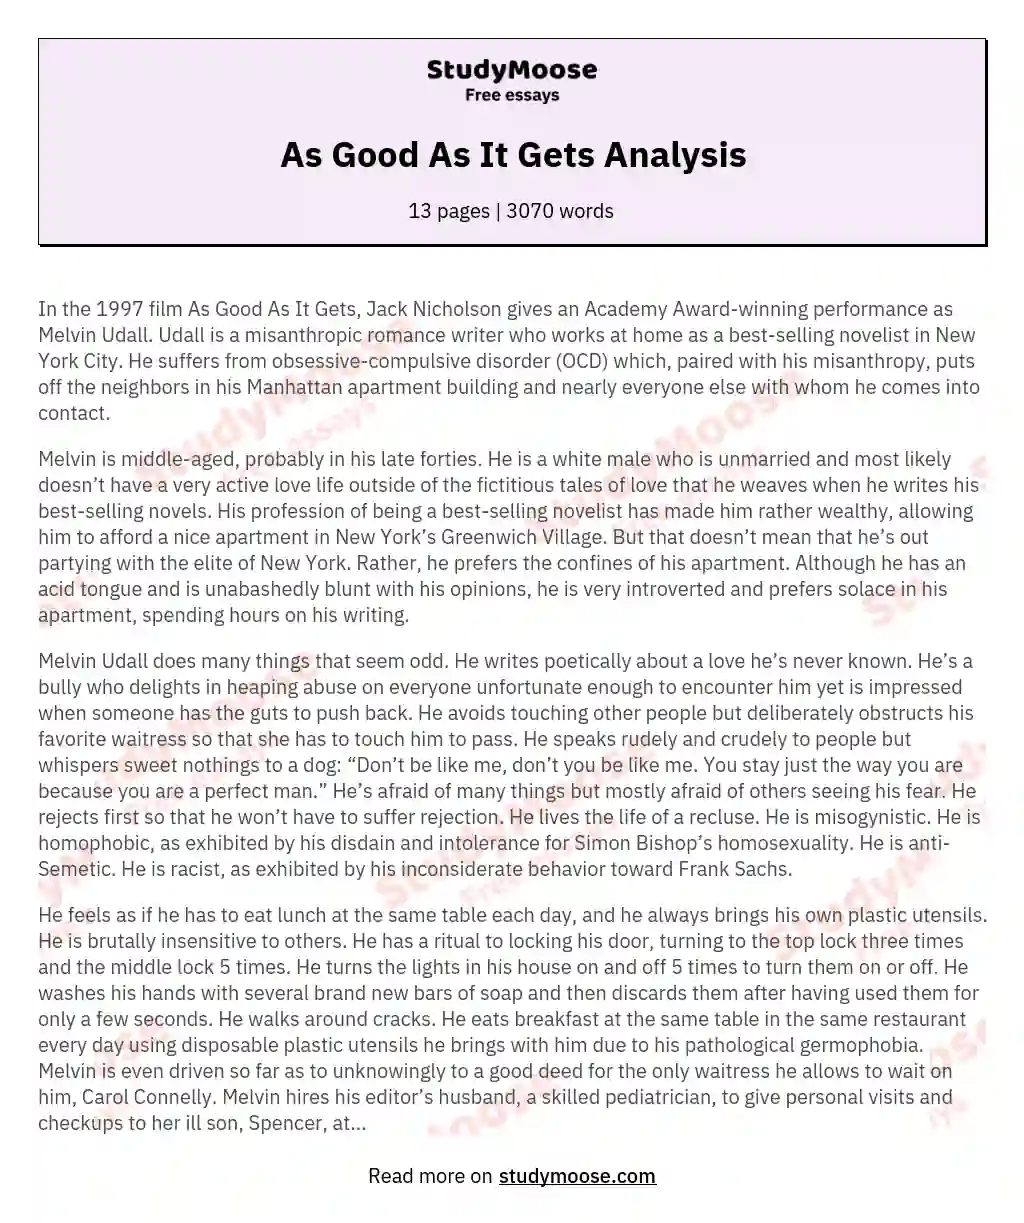 As Good As It Gets Analysis essay